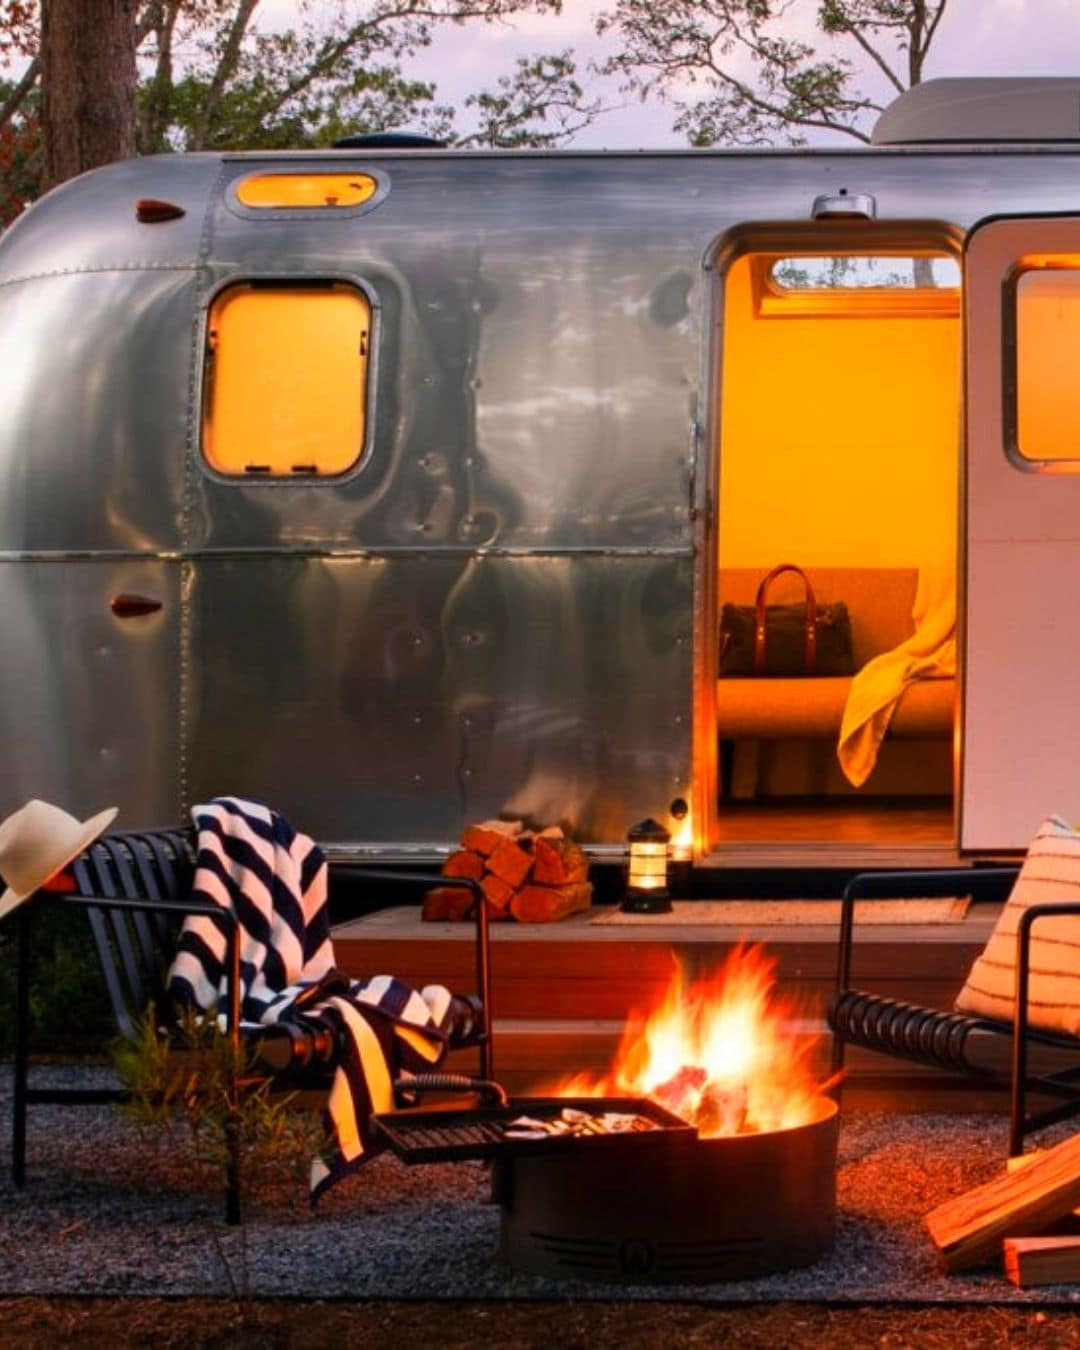 Experience Coastal Glamping at AutoCamp Cape Cod